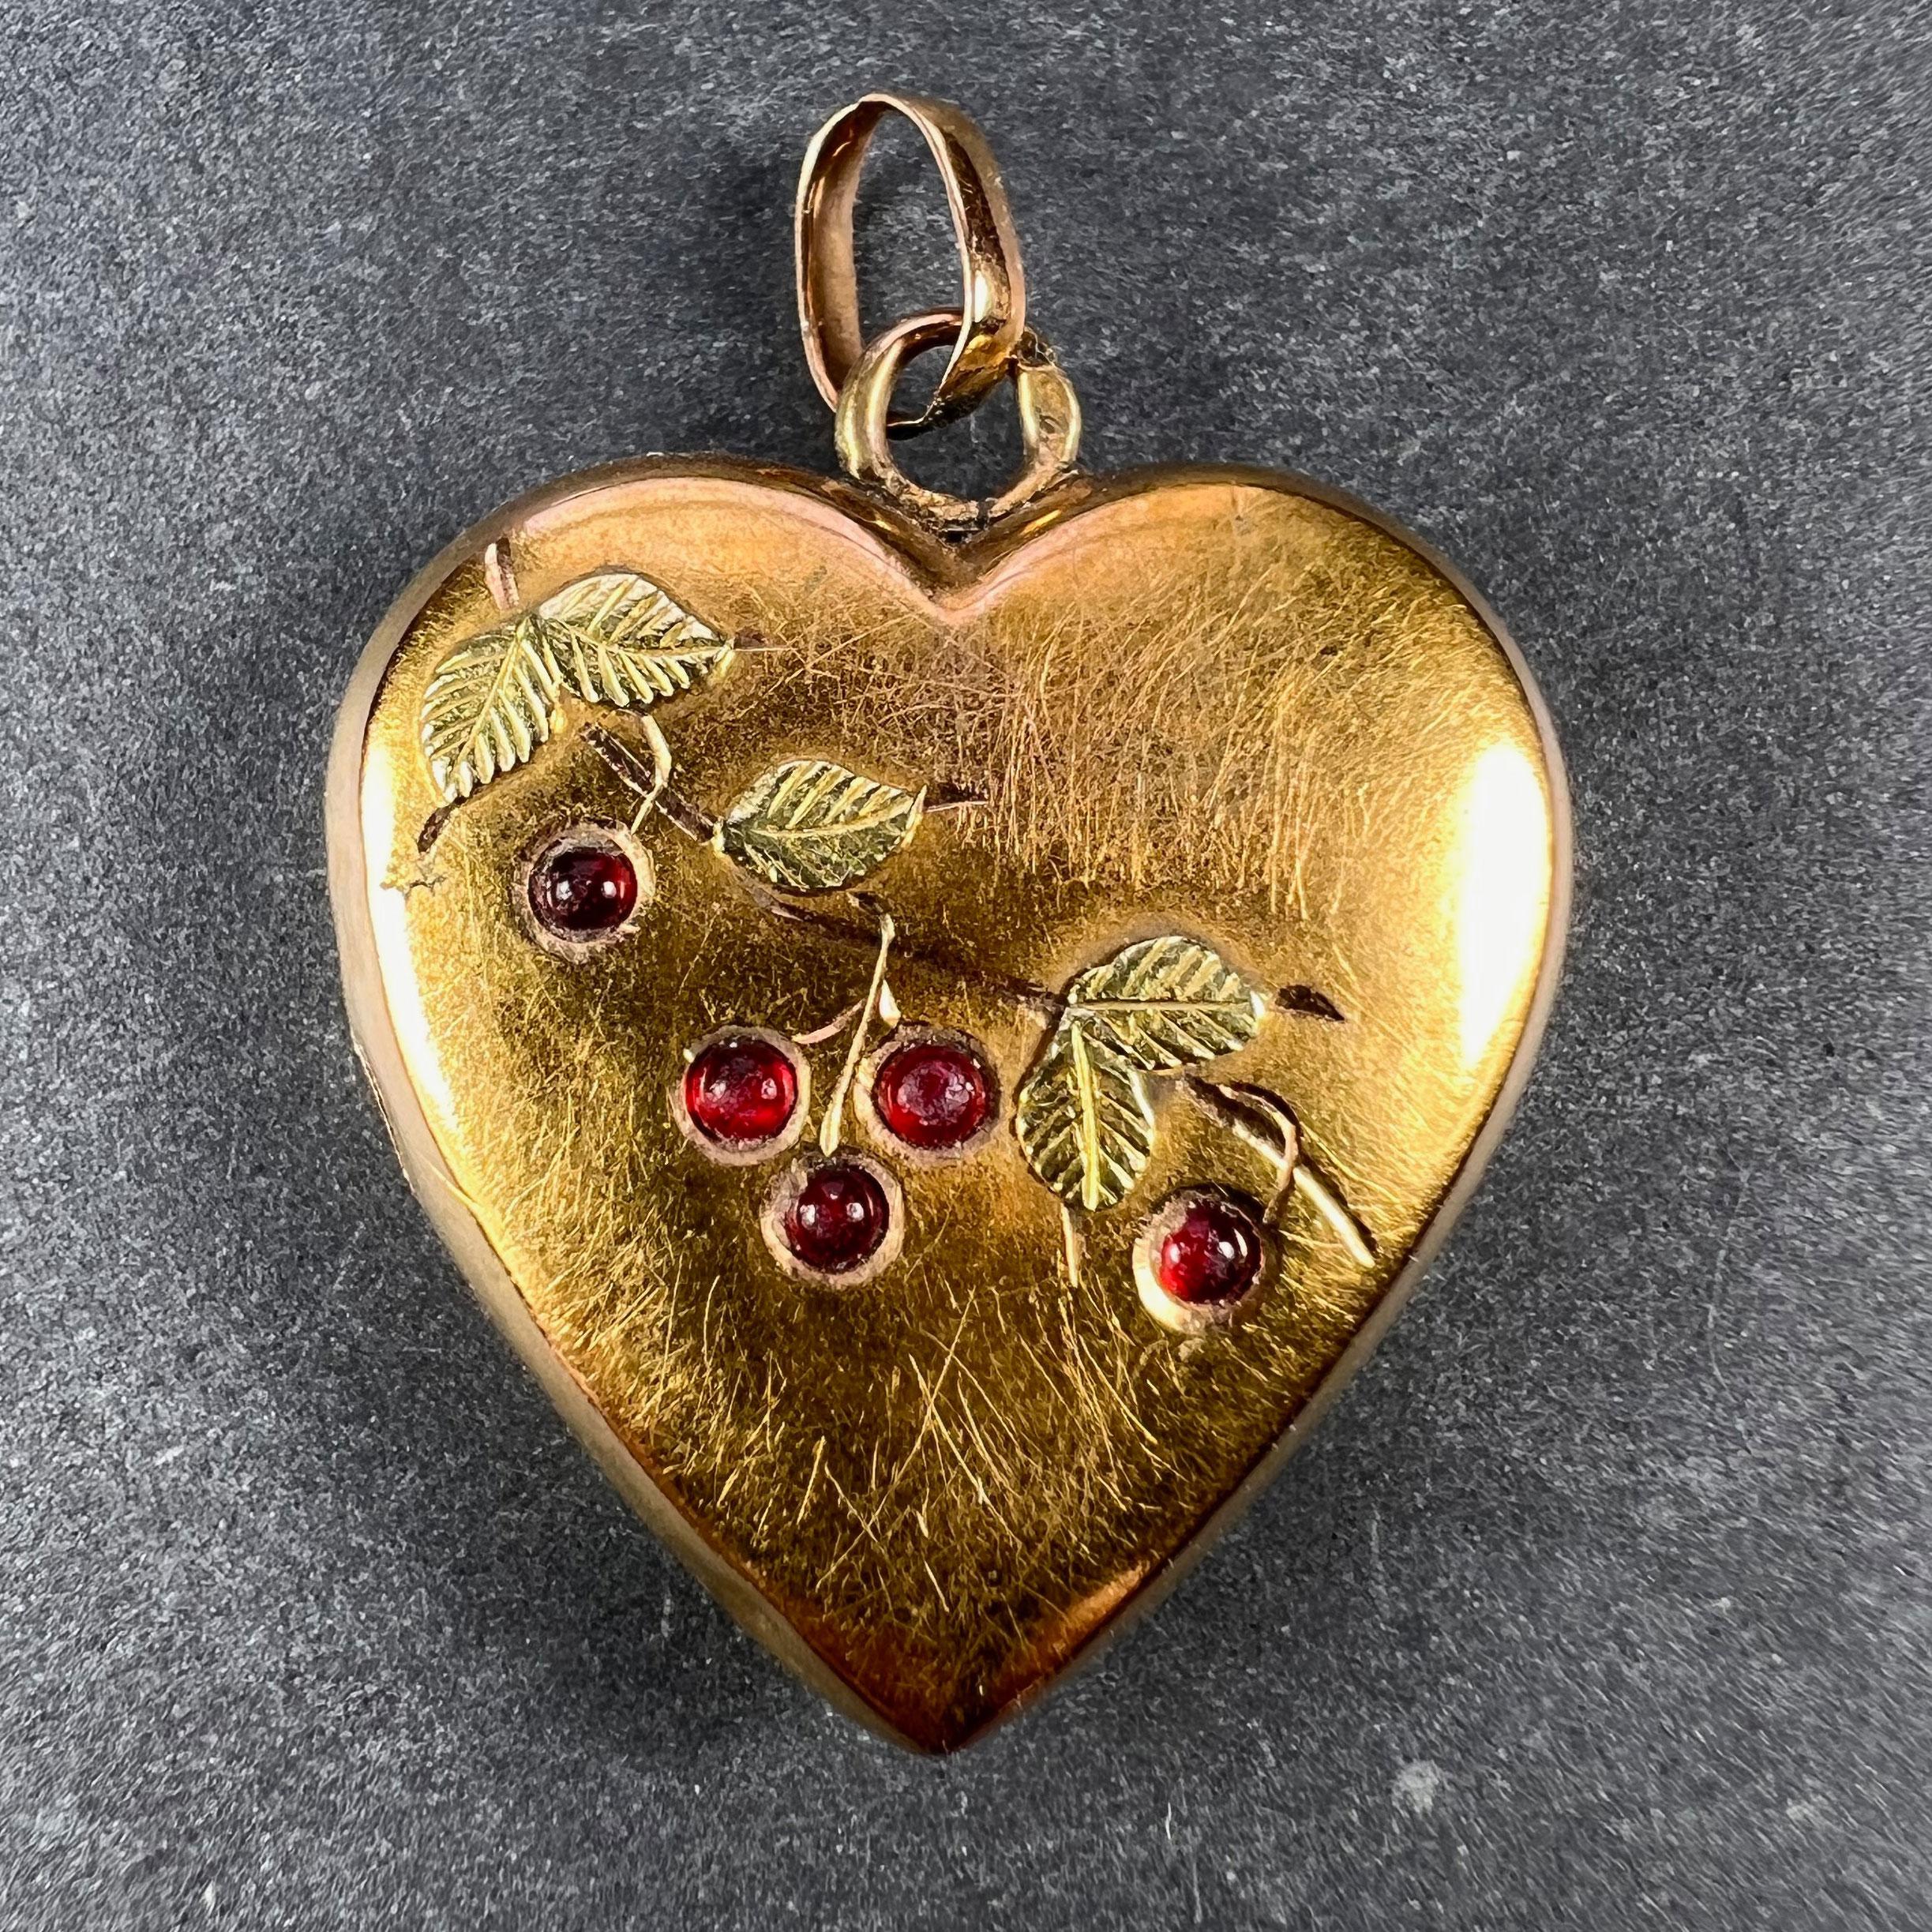 A French 18 karat (18K) yellow gold charm pendant designed as a love heart engraved with a branch of cherries with green gold leaves, set with red round cabochon cut pastes (man-made glass). Stamped with the eagle's head for 18 karat gold and French